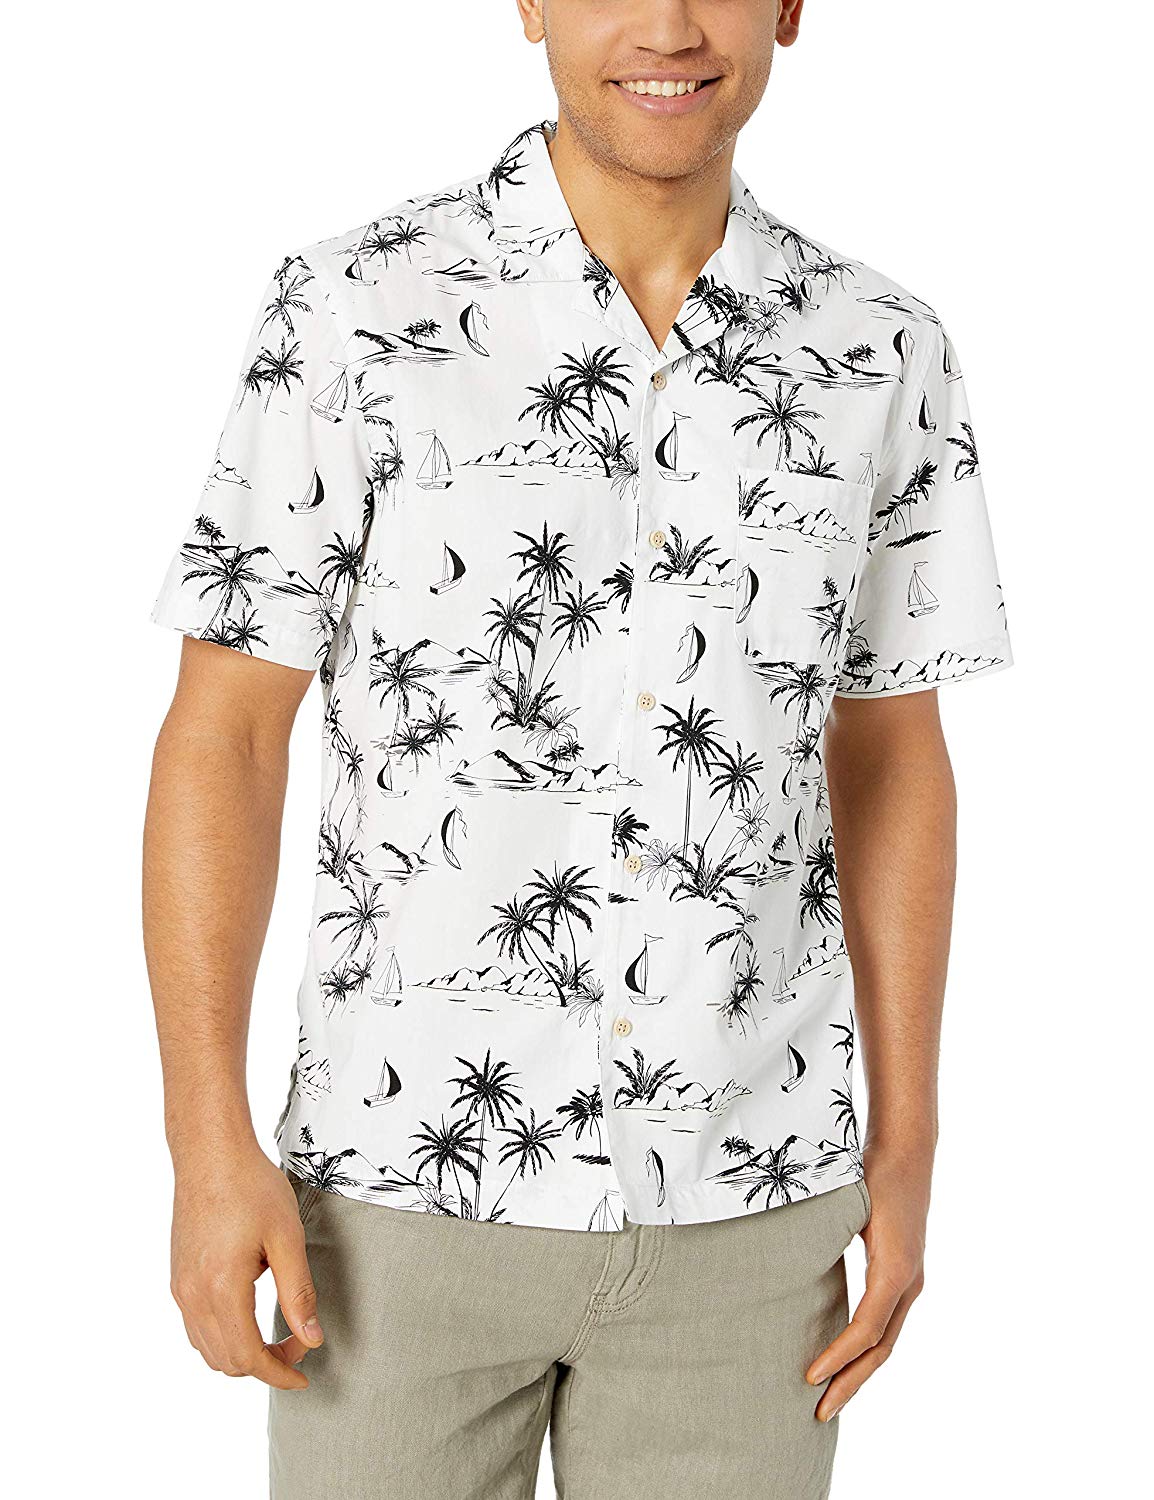 28 Palms Men's Relaxed-Fit 100% Cotton Tropical, White/Black Scenic ...